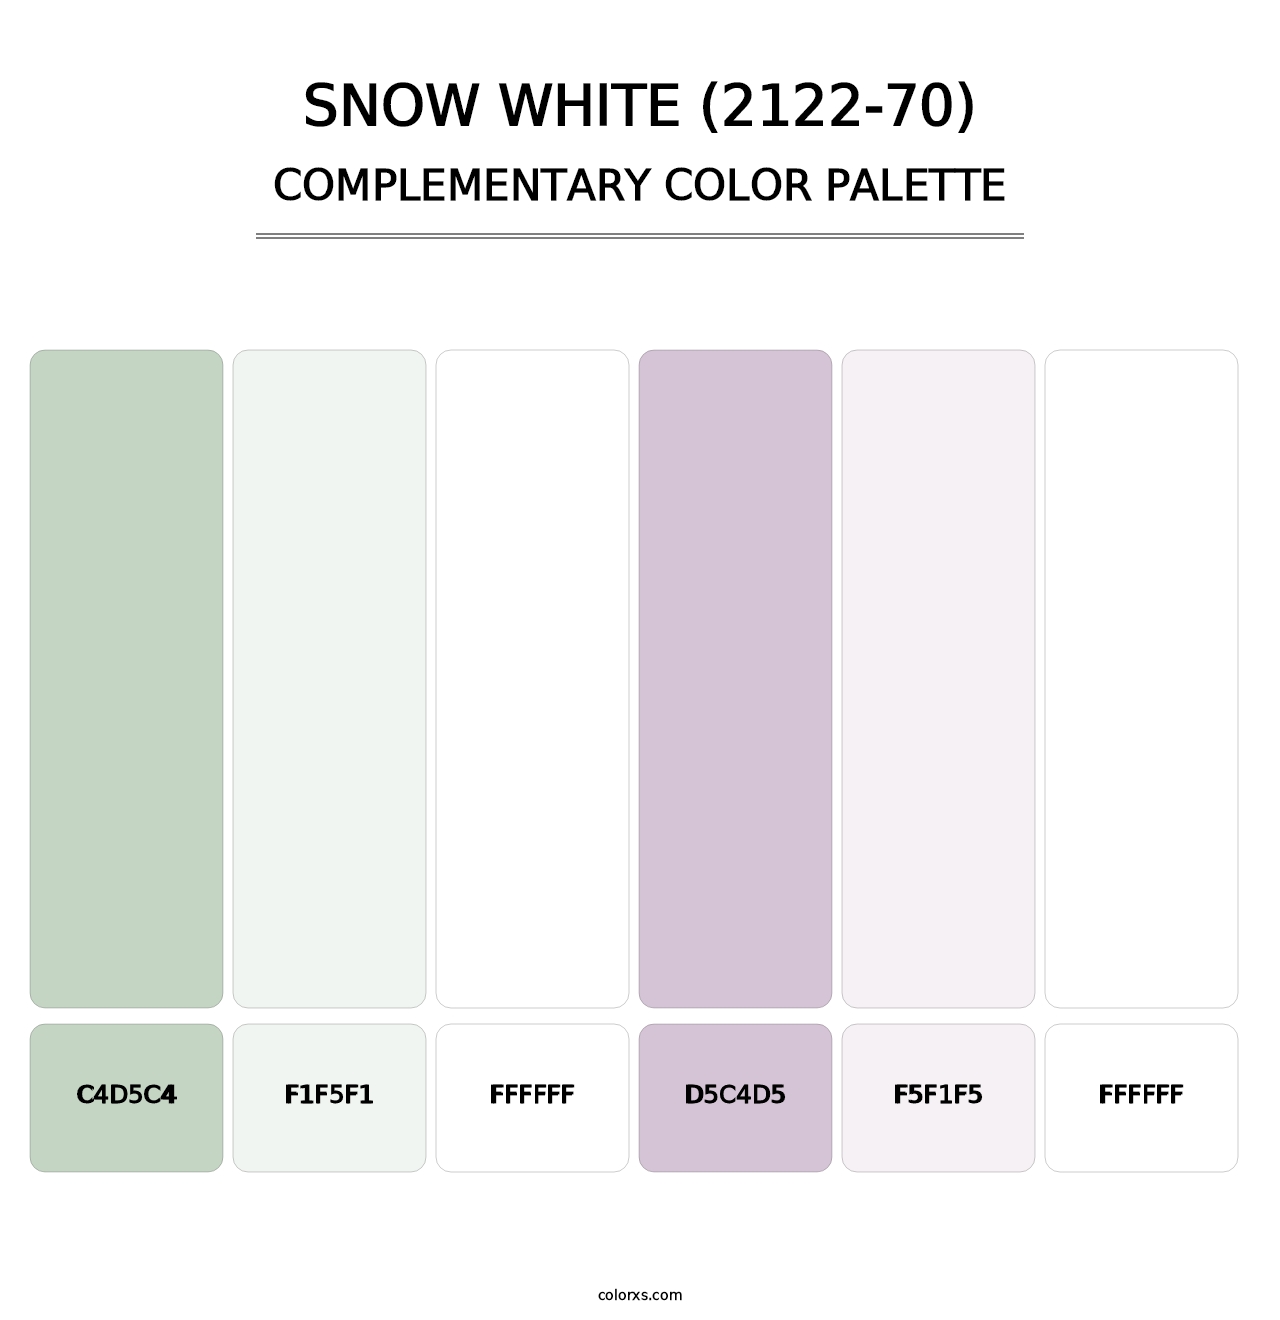 Snow White (2122-70) - Complementary Color Palette